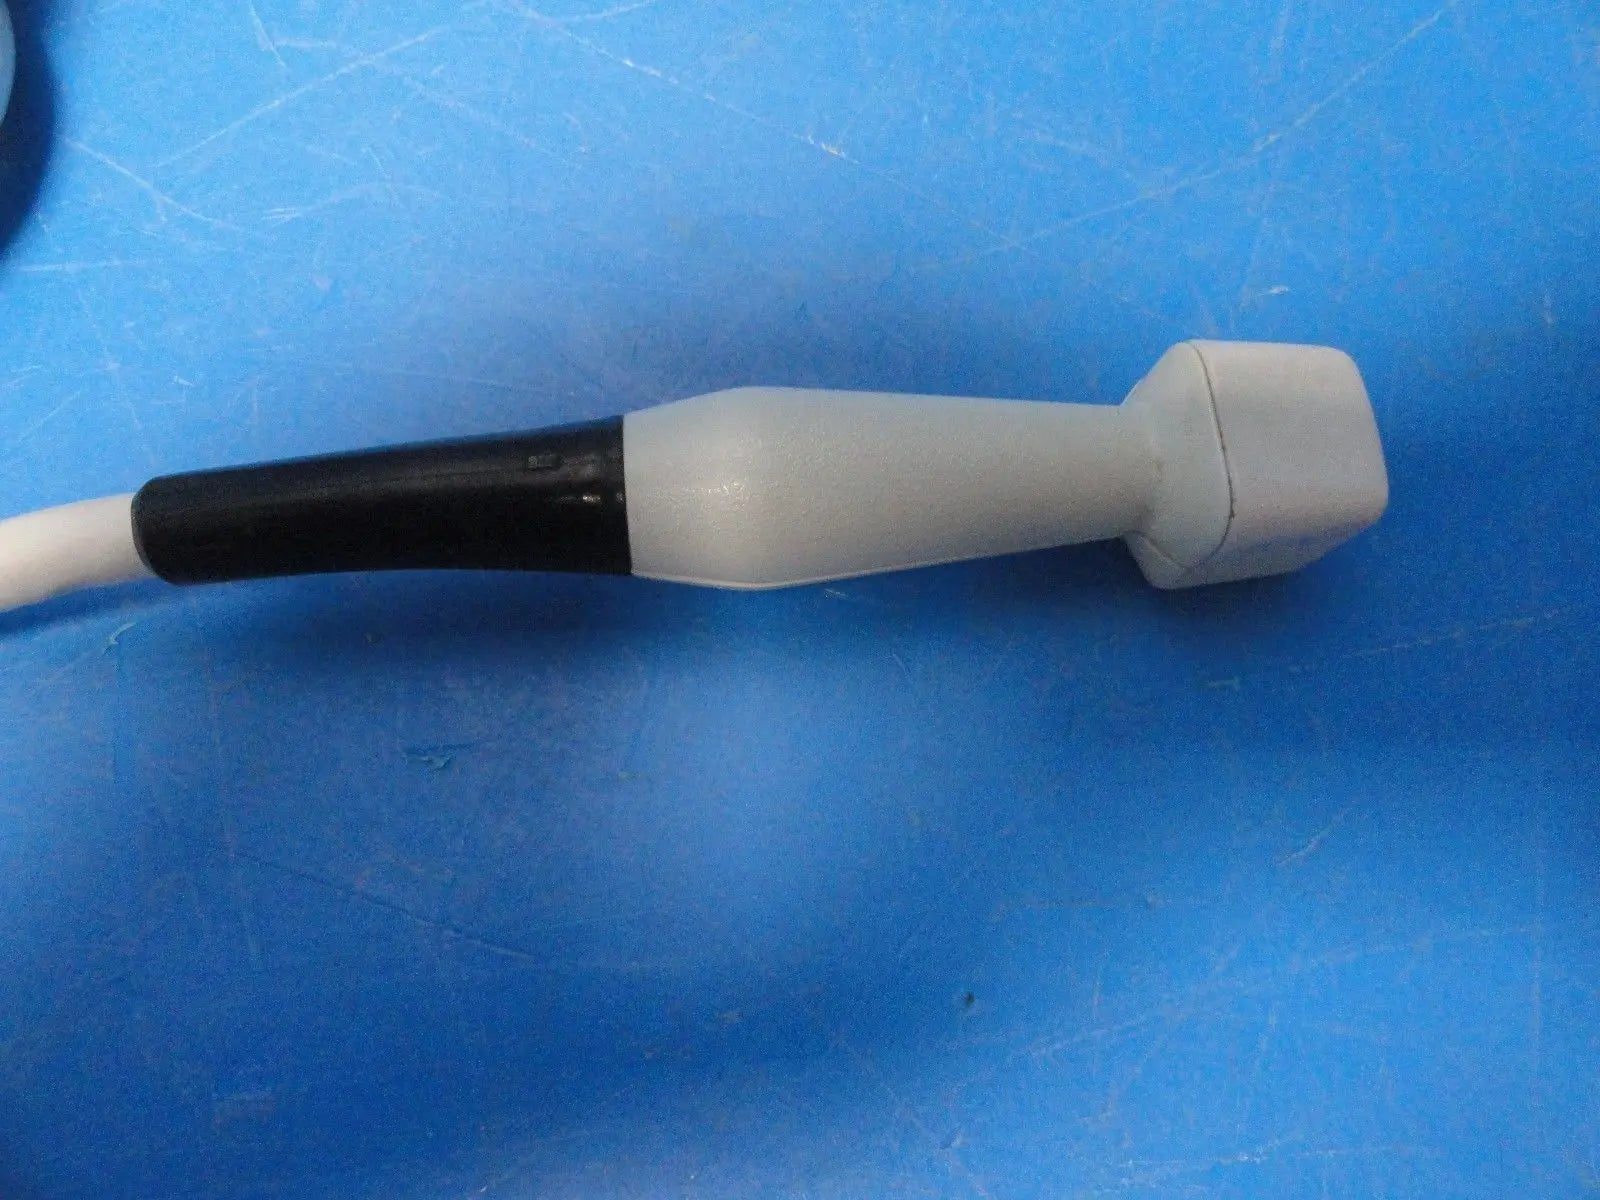 GE 2.5/48S P/N 45-231613G1 Sector Ultrasound Transducer Probe (8693) DIAGNOSTIC ULTRASOUND MACHINES FOR SALE